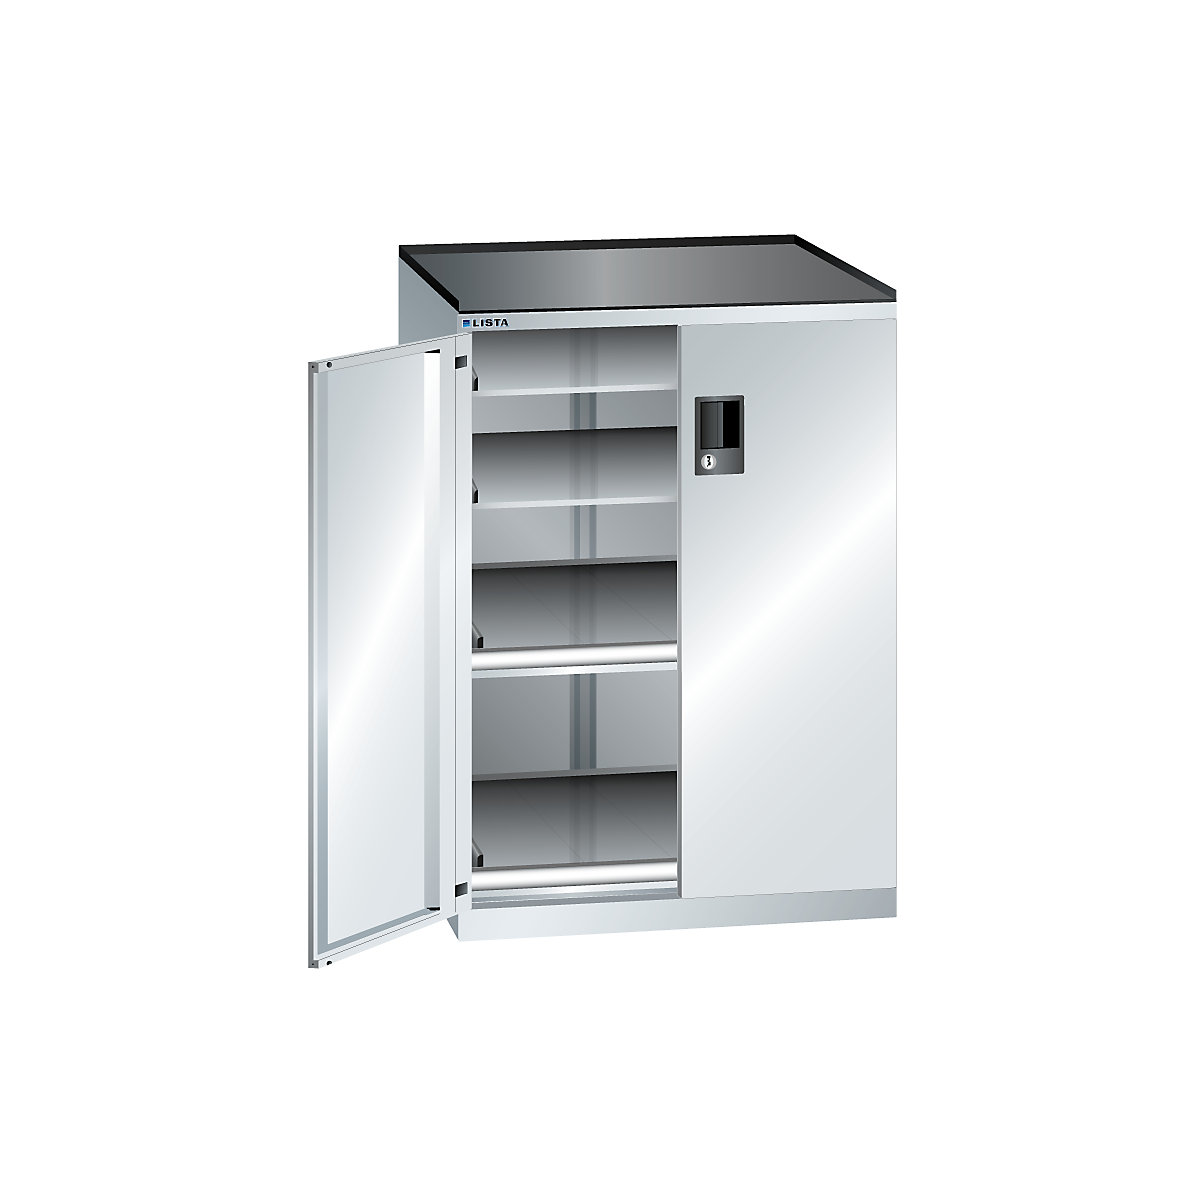 Drawer cupboard with hinged doors – LISTA, height 1020 mm, 4 shelves, max. load 75 kg, light grey-2